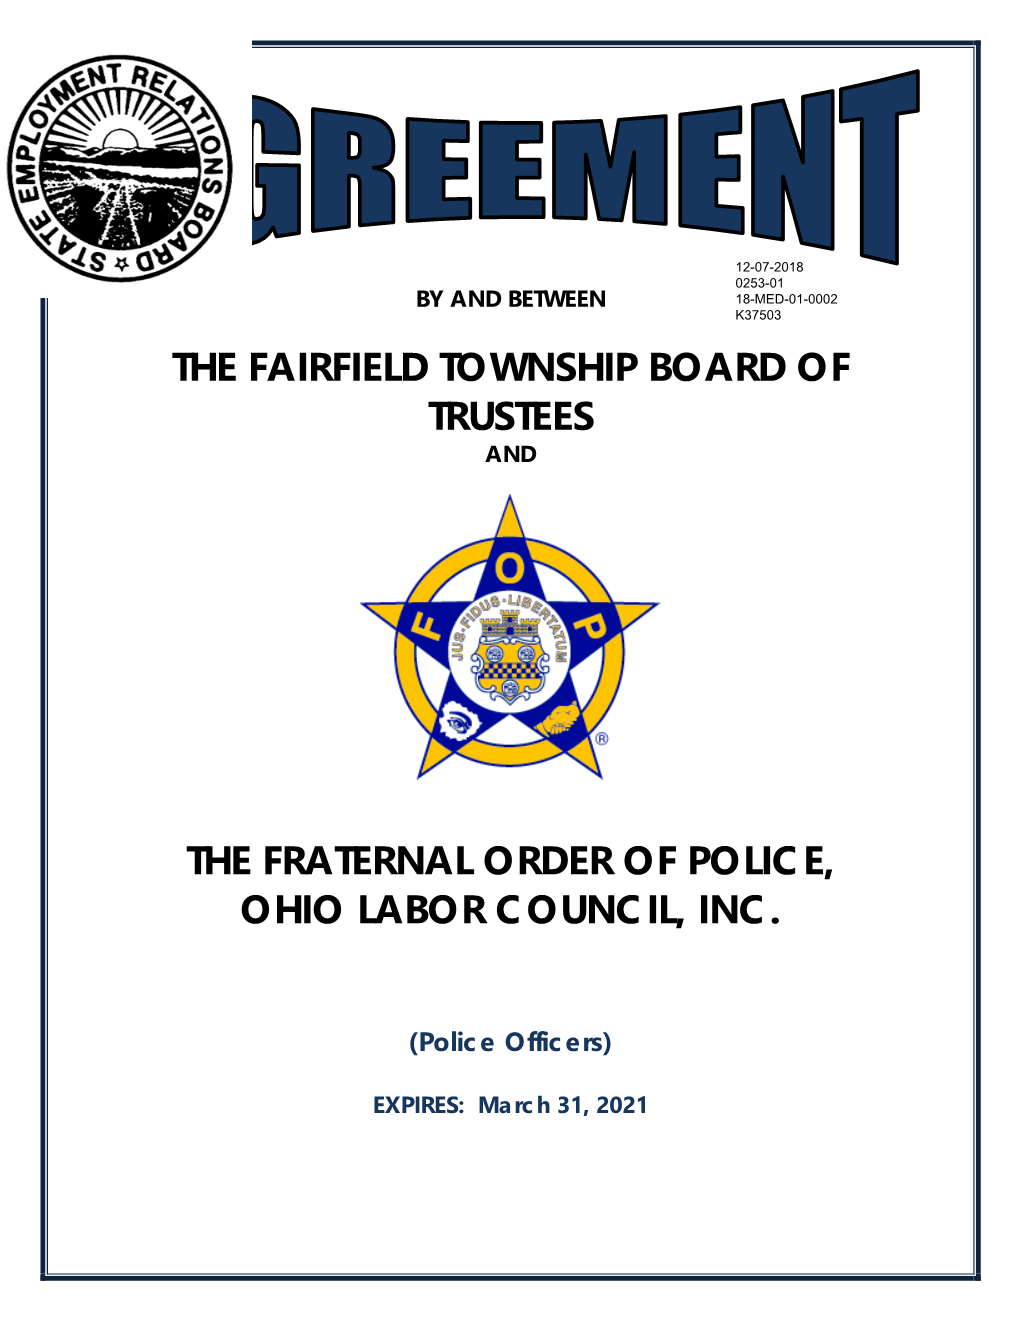 The Fairfield Township Board of Trustees the Fraternal